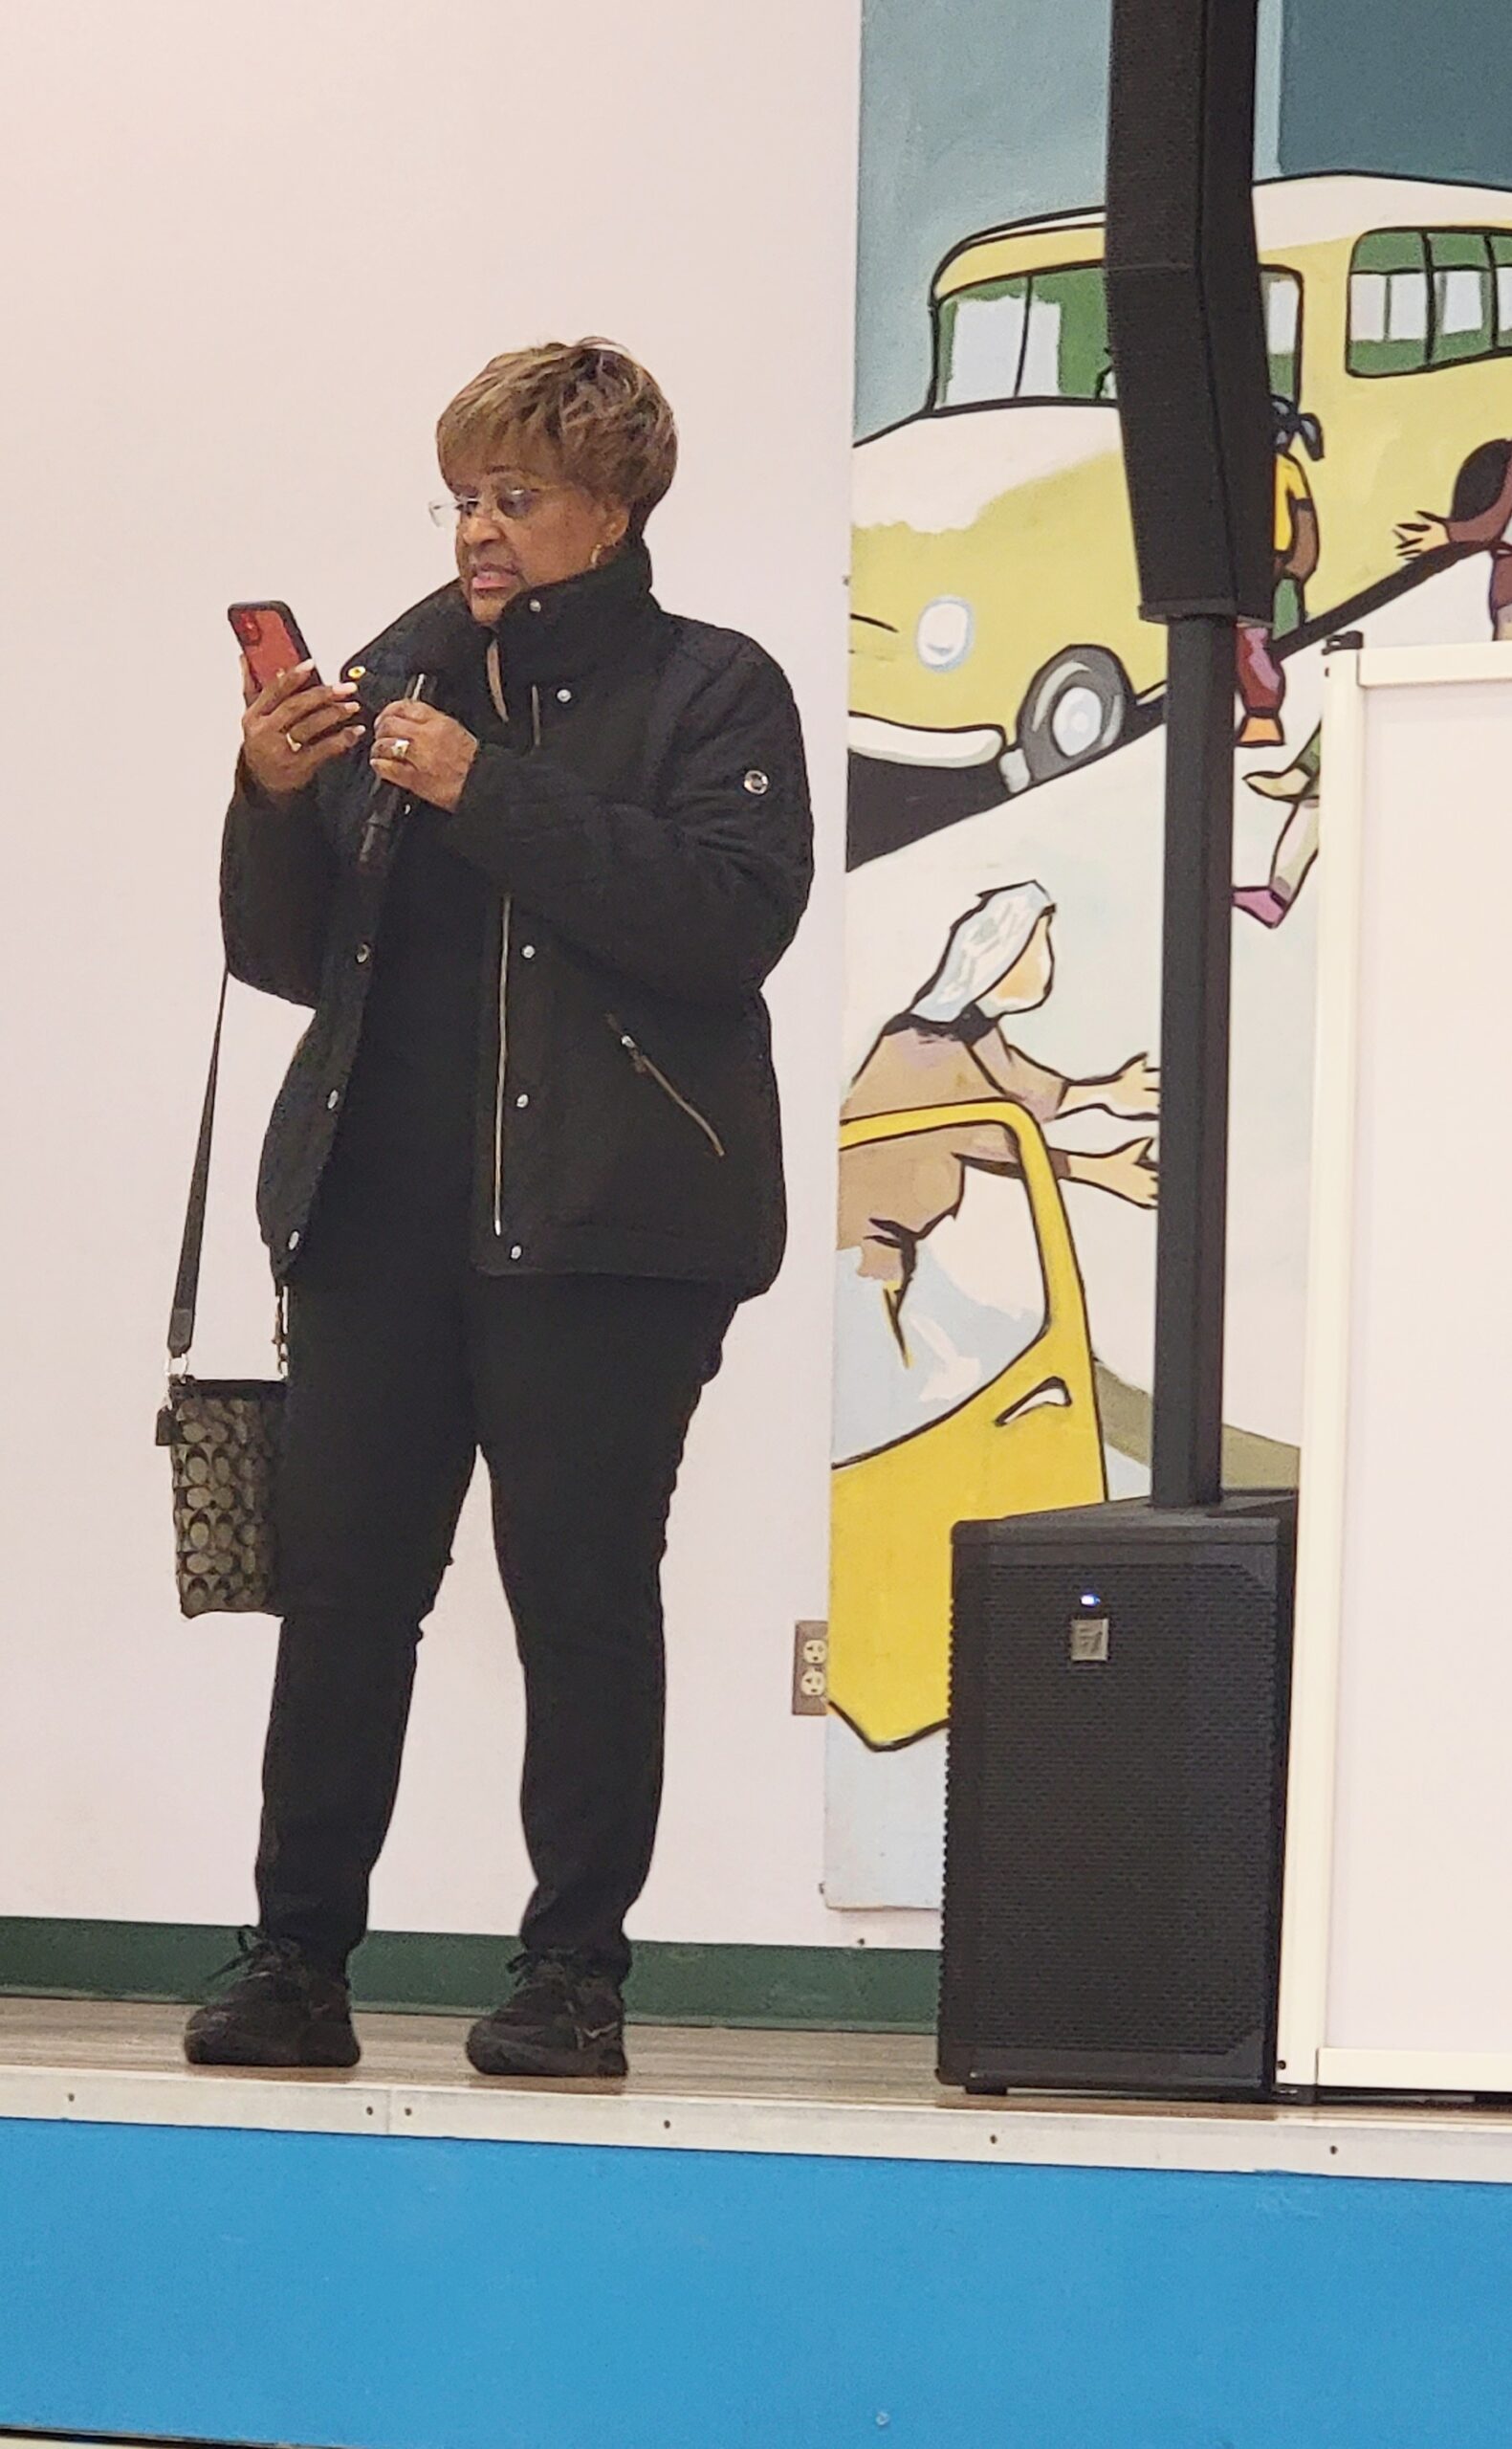 A woman standing on stage with a cell phone.